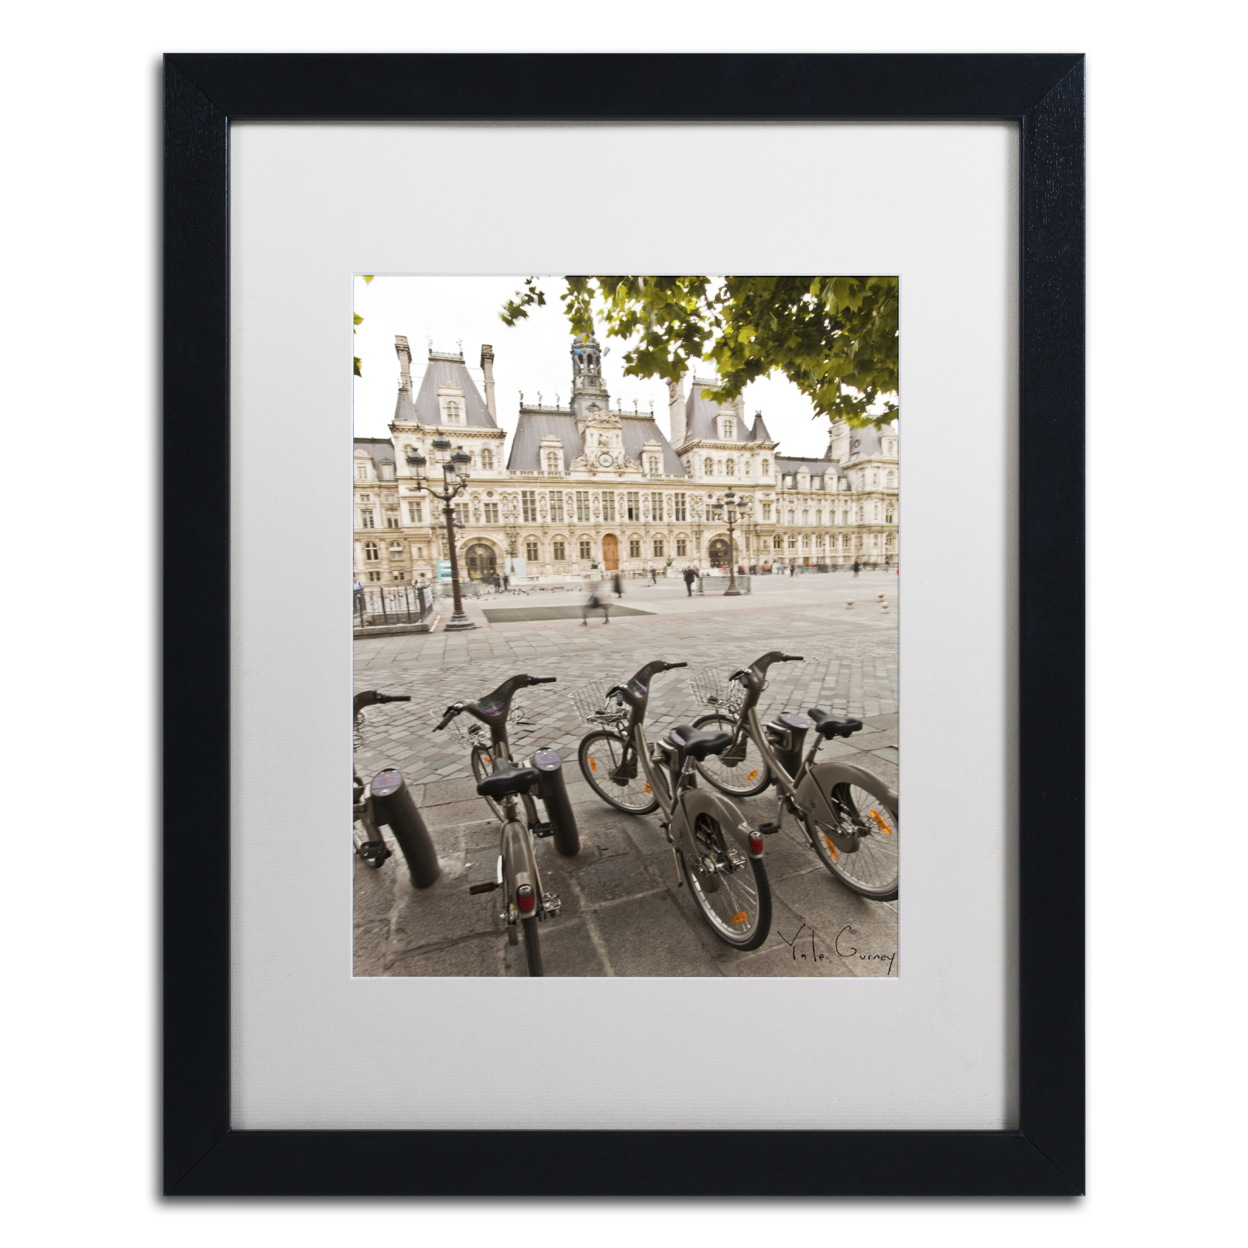 Yale Gurney 'Paris Deux - City Hall Bicycles' Black Wooden Framed Art 18 X 22 Inches